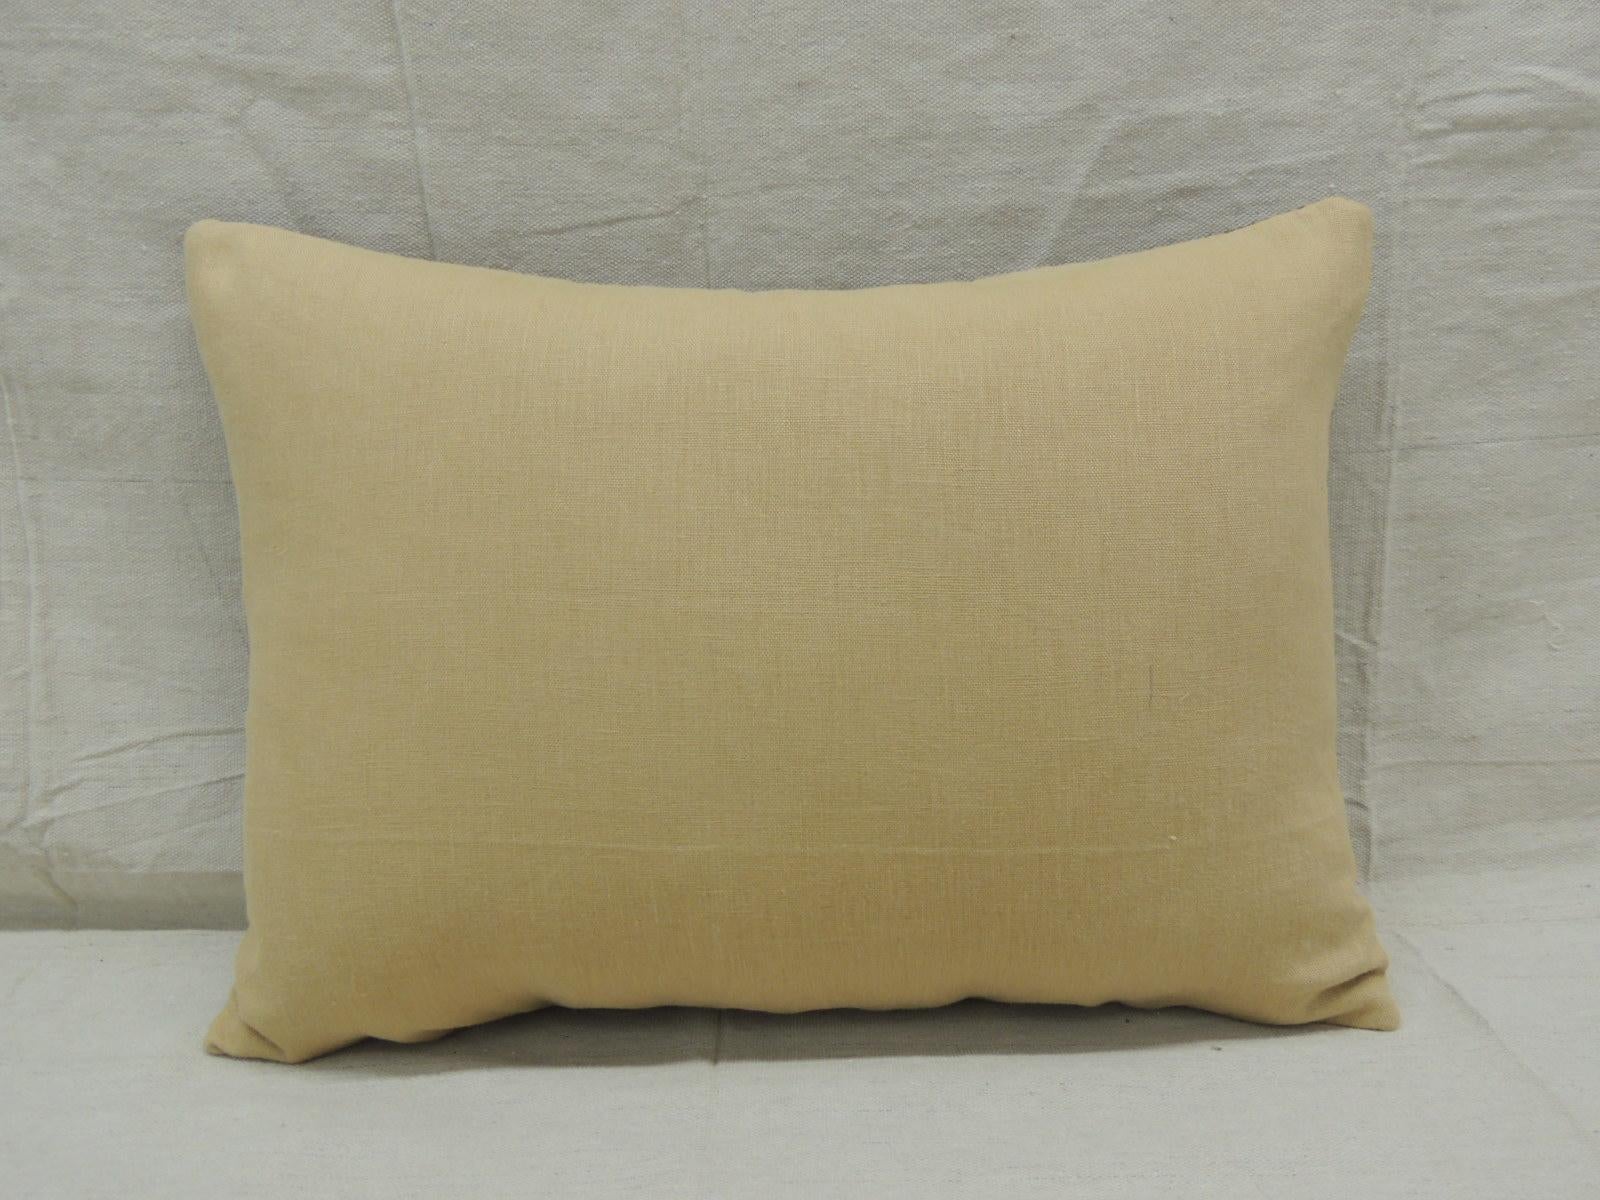 Hand-Crafted Vintage Tan and Brown African Kuba Decorative Bolster Pillow